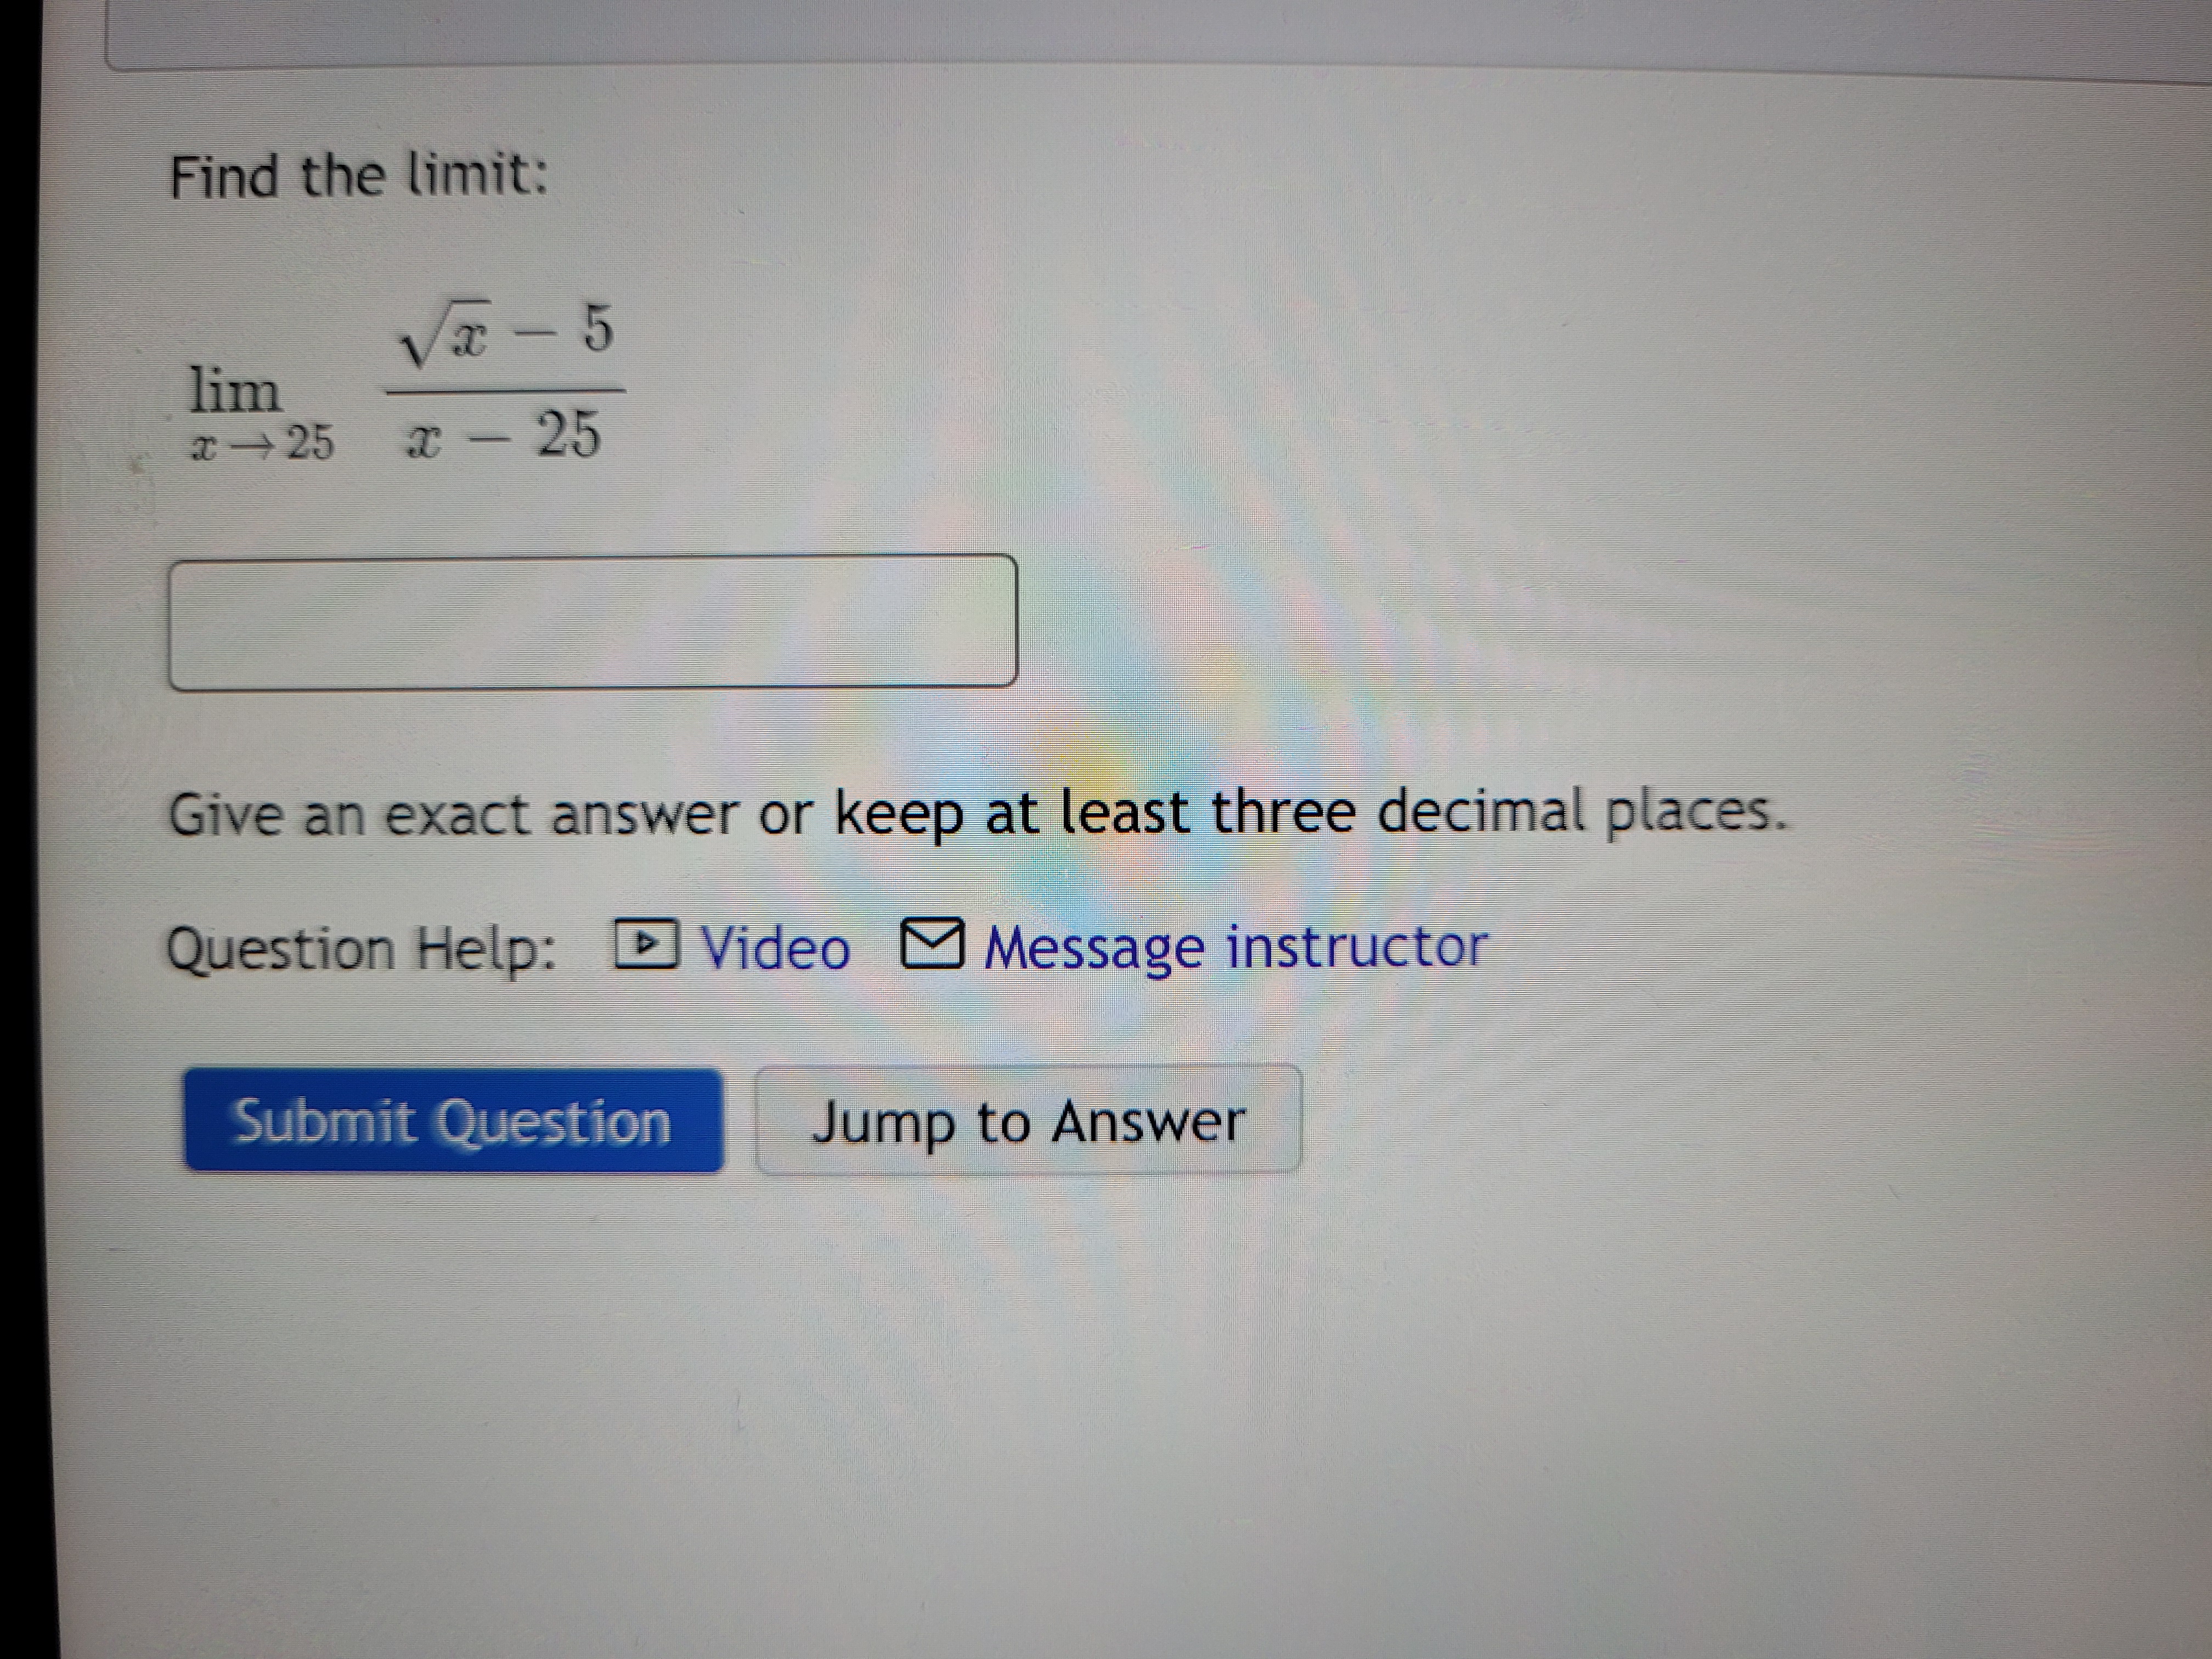 Find the limit:
- 5
lim
x25
I-25
Give an exact answer
Question Help: DV
Submit Question
